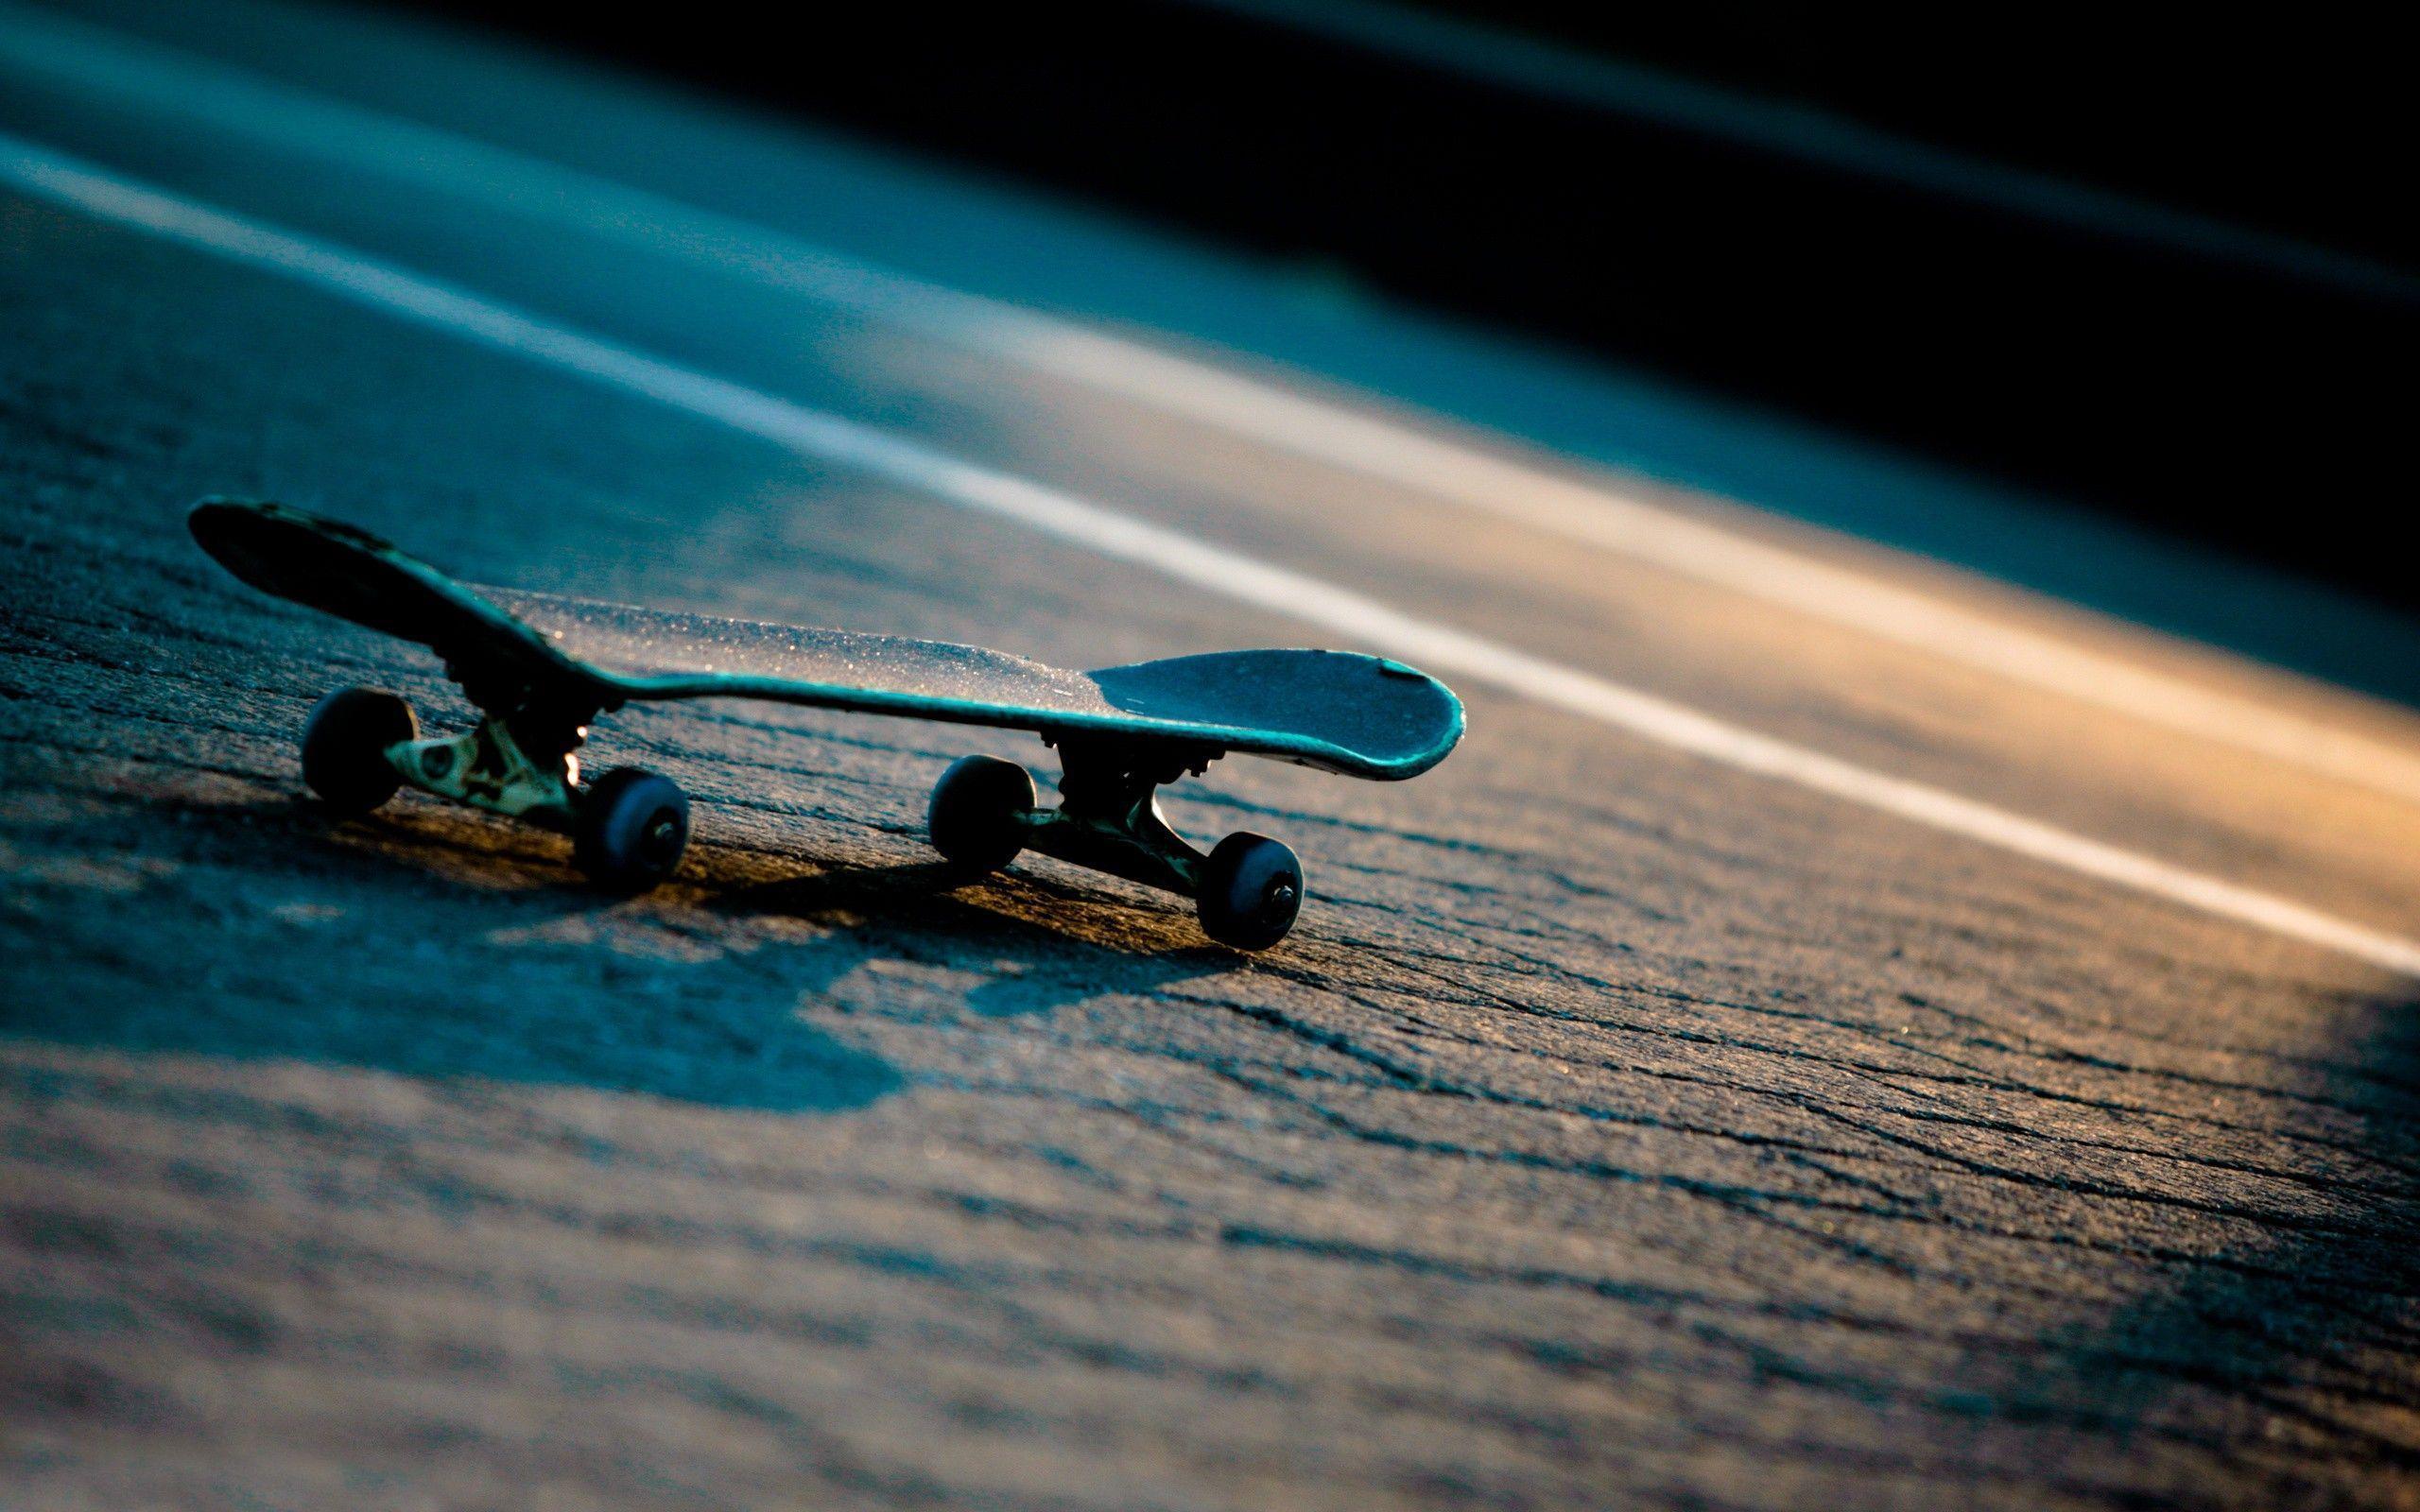 Skateboard Instagram Wallpapers by HD Wallpapers Daily